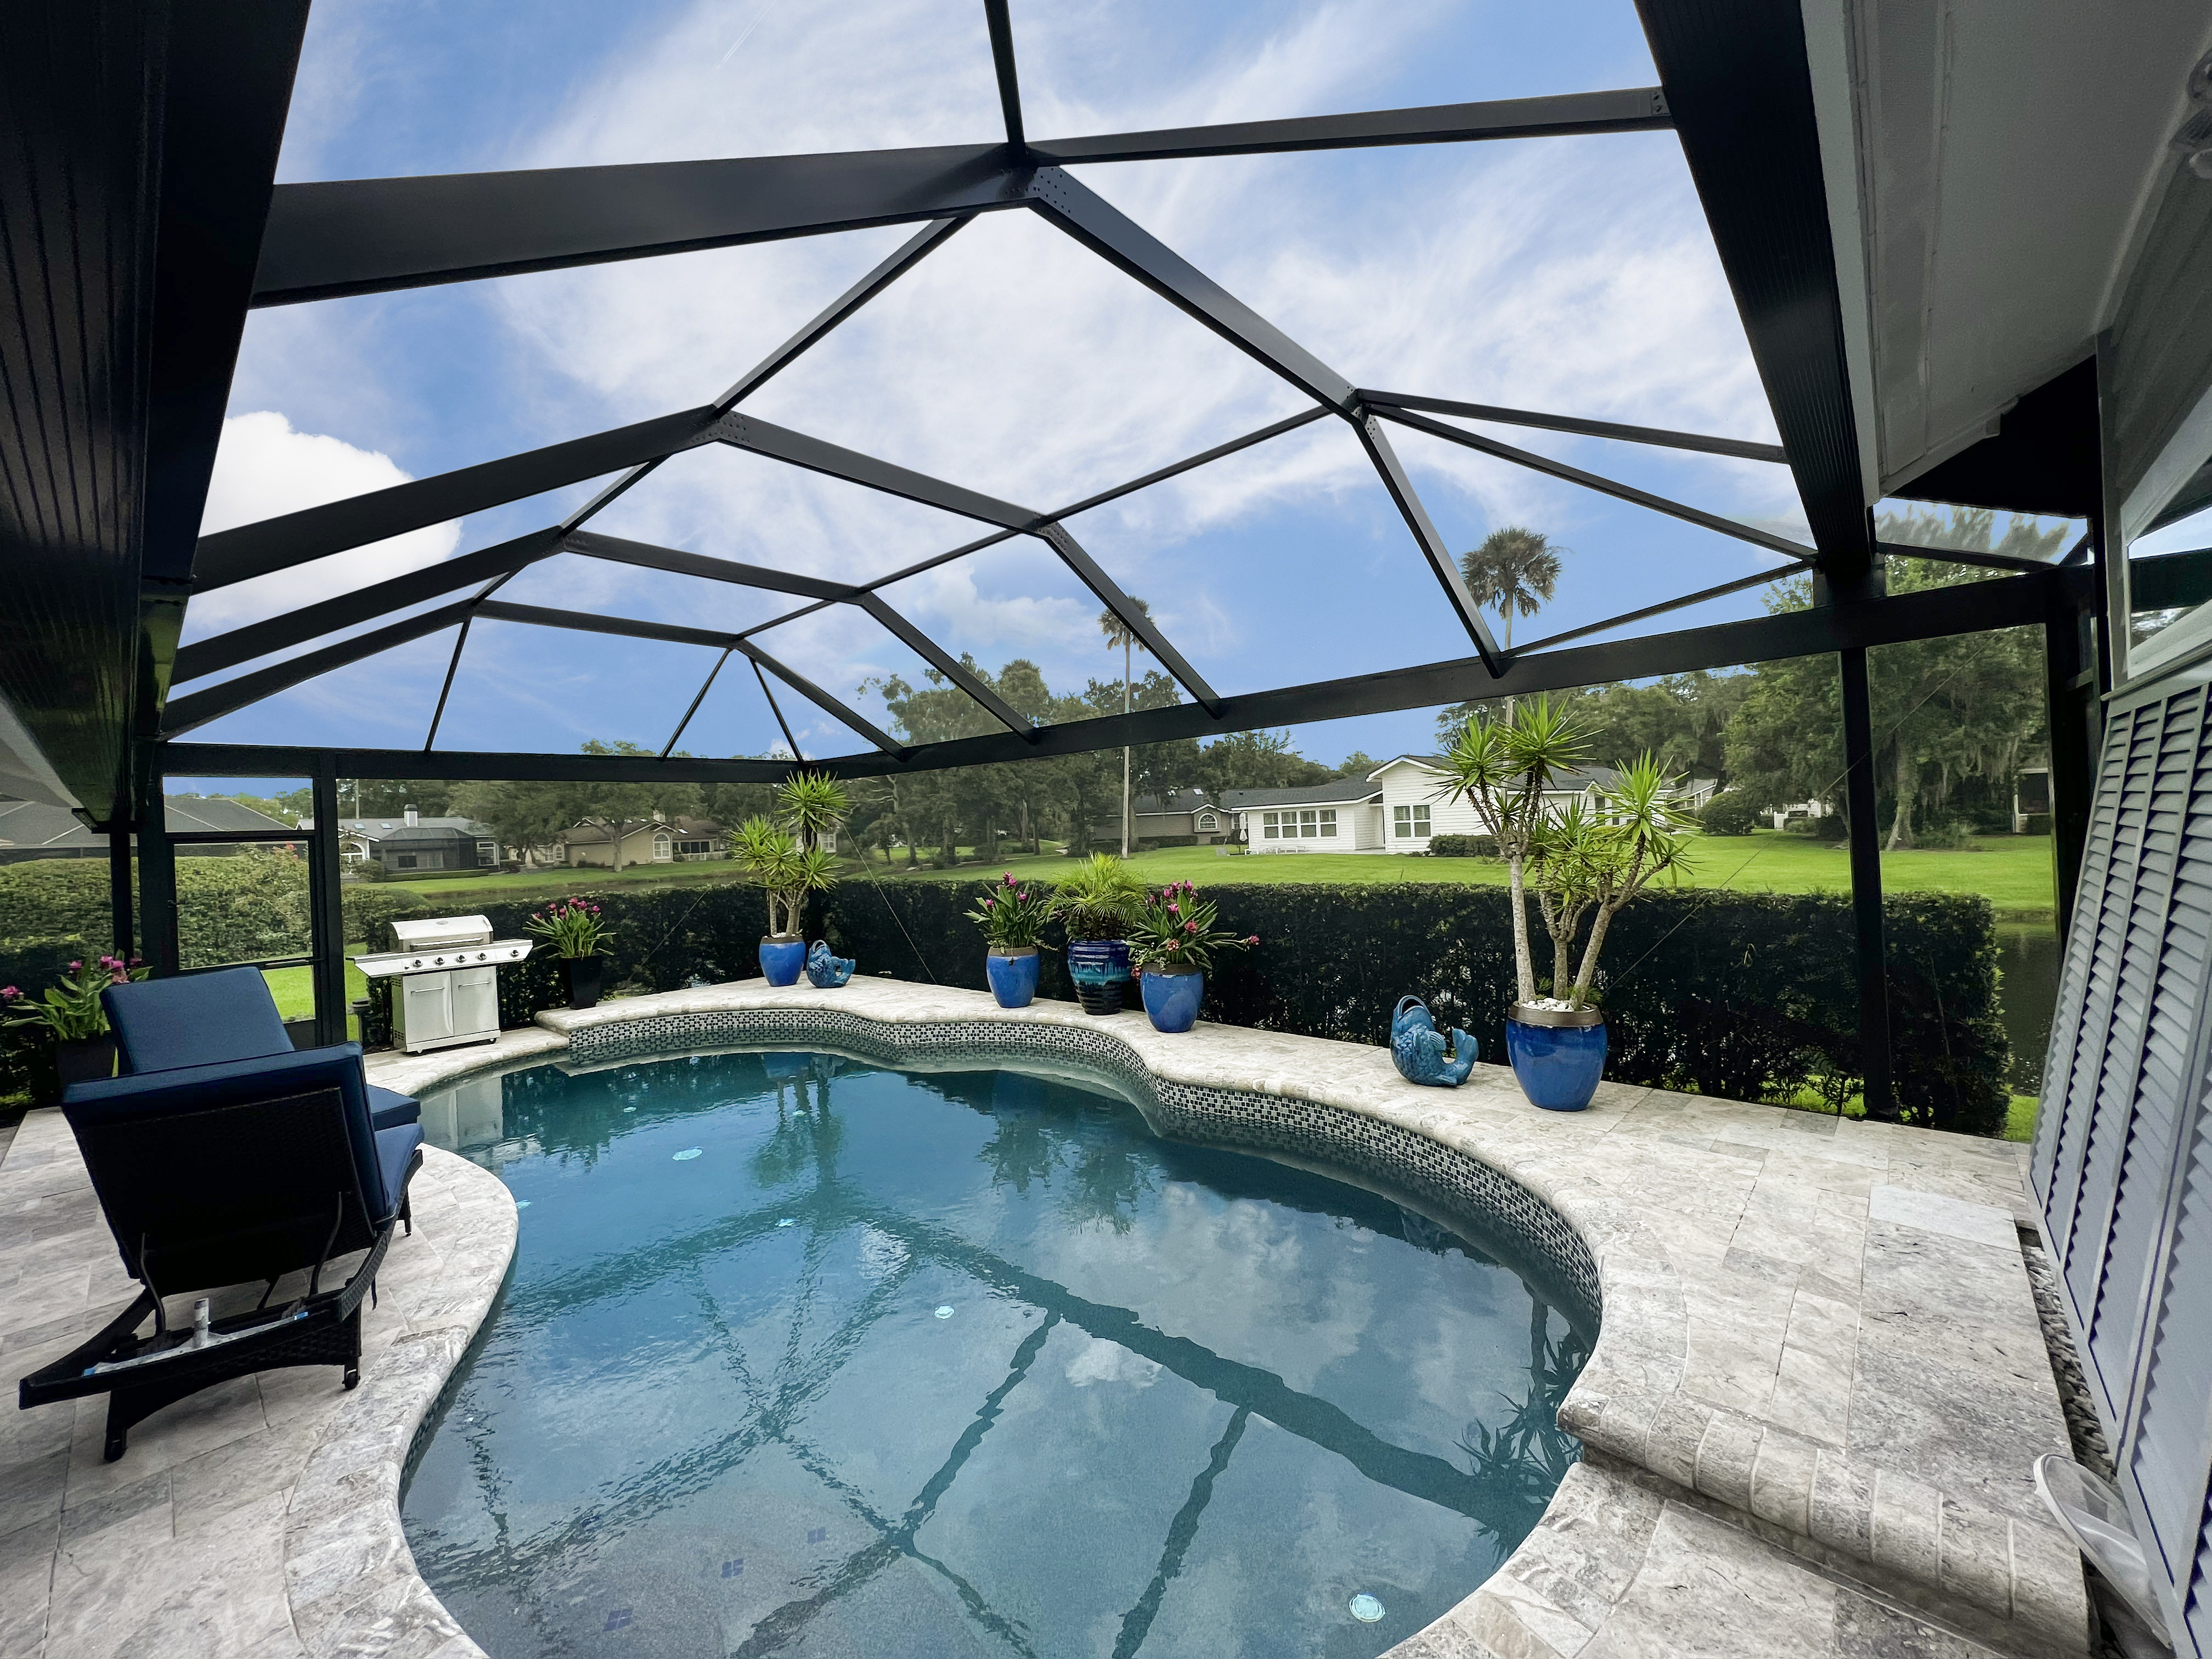 A custom screen enclosure providing a shield against the elements, allowing you to enjoy your outdoor space regardless of rain, wind, or intense sunlight.